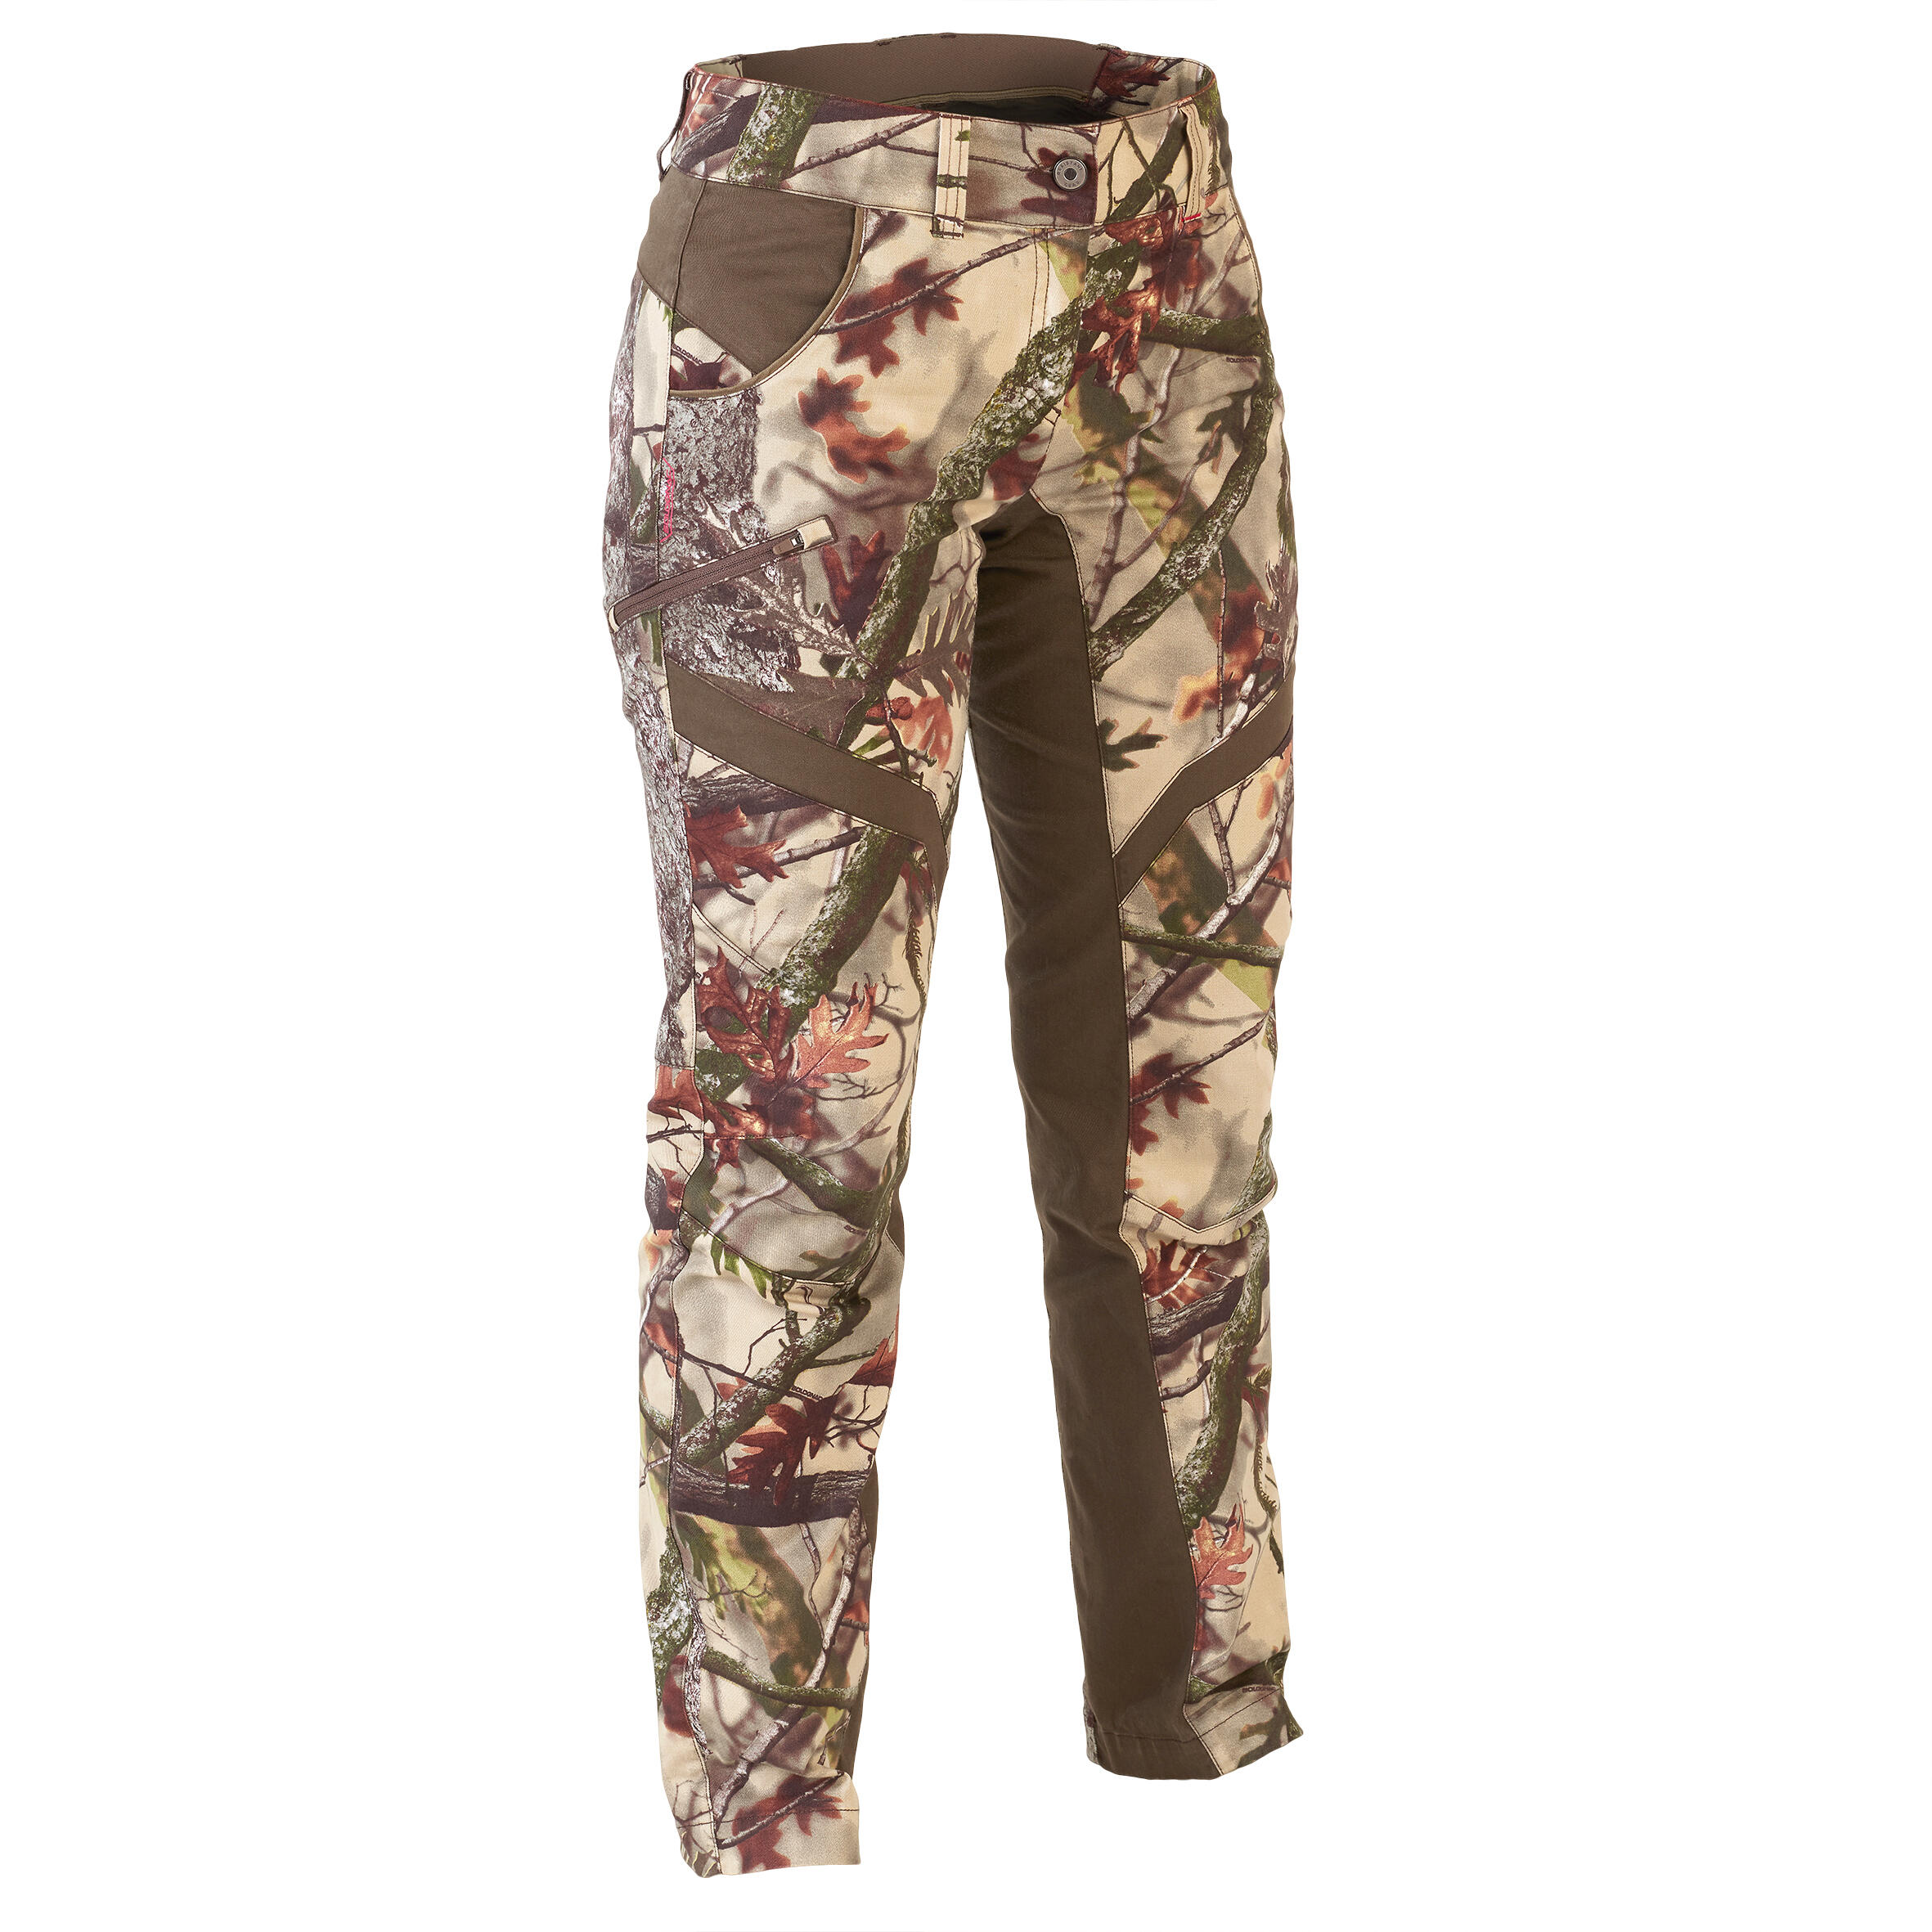 500 women s silent breathable hunting trousers camo